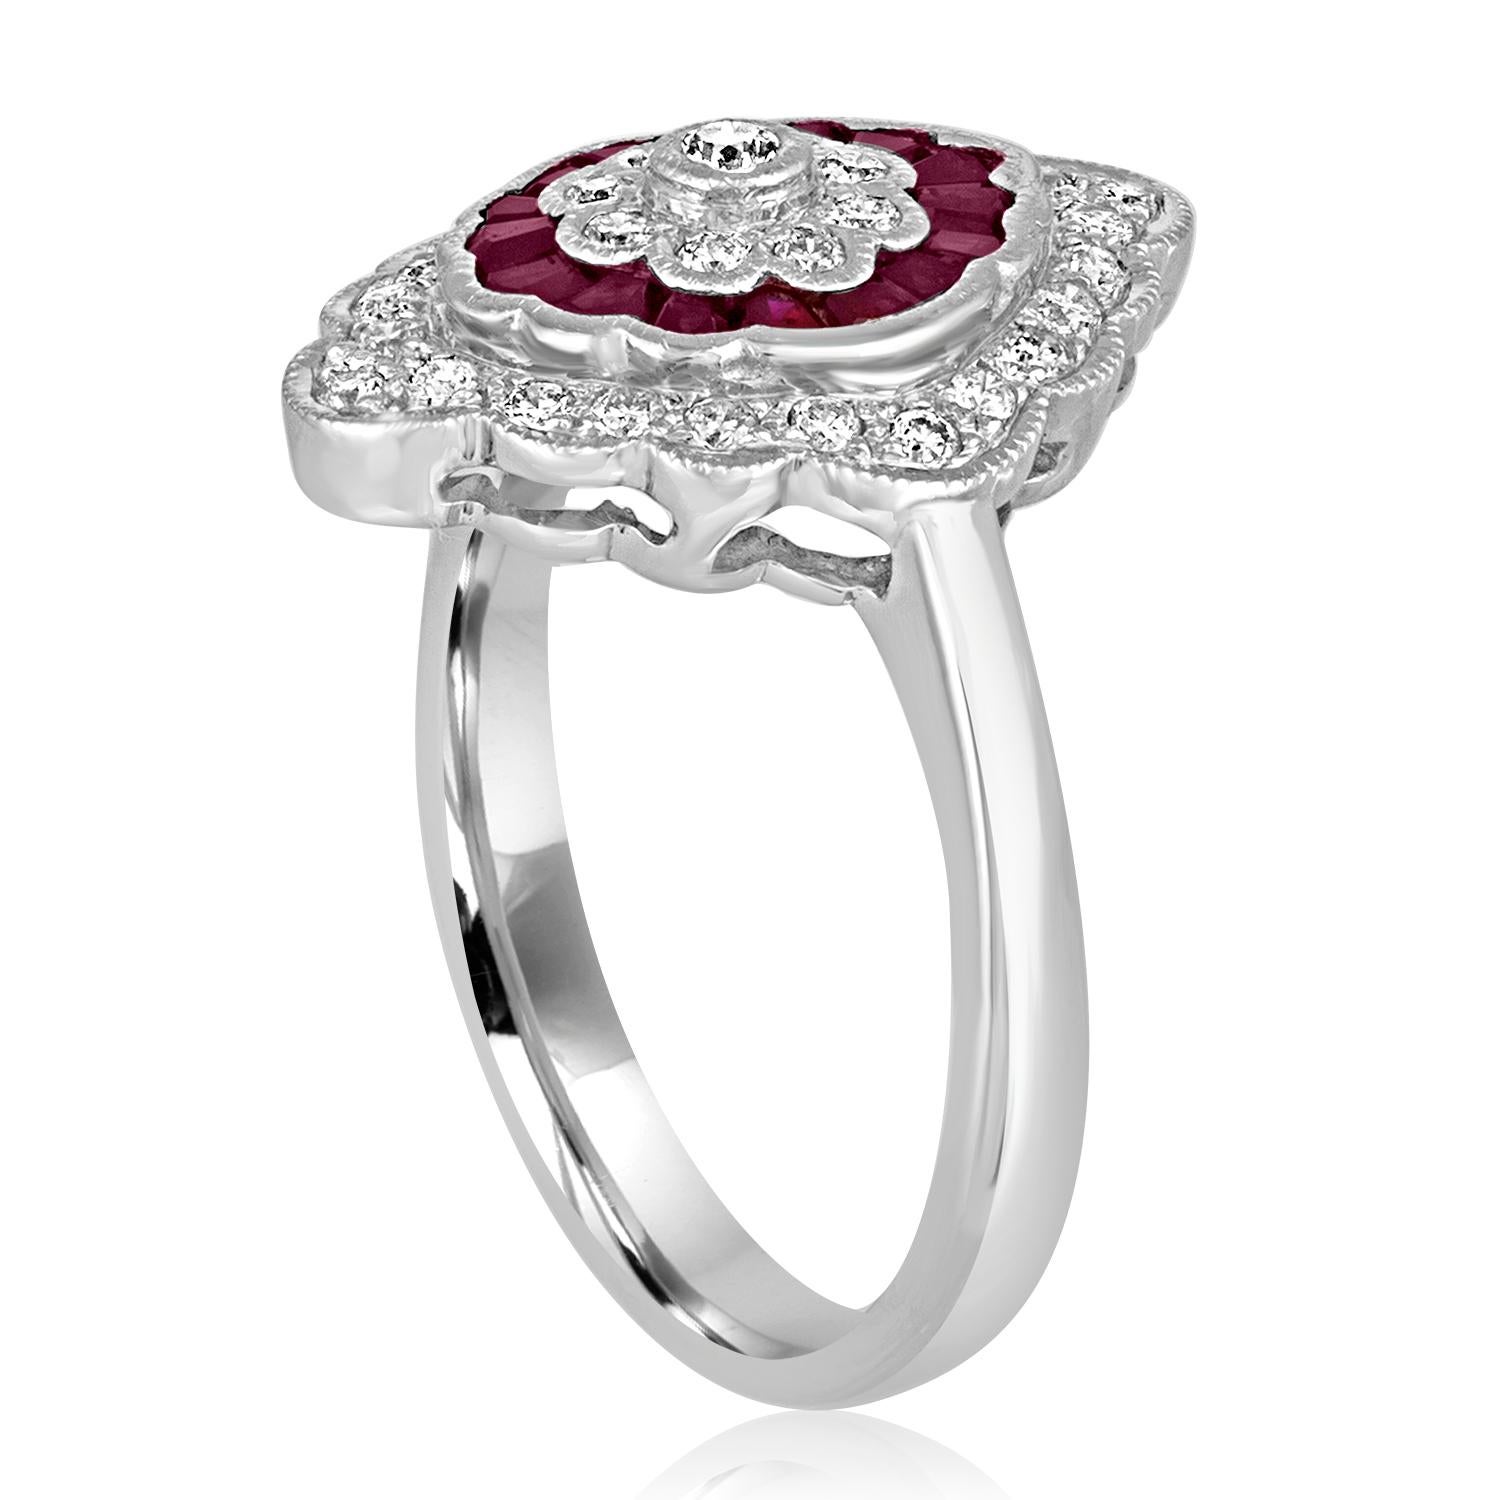 Art Deco Revival Style Ring.
The ring is 18K White Gold
There are 0.44 Carats in Diamonds H SI
There are 0.30 Carats in Rubies
The ring is a size 6.50, sizable.
The ring measures 0.75